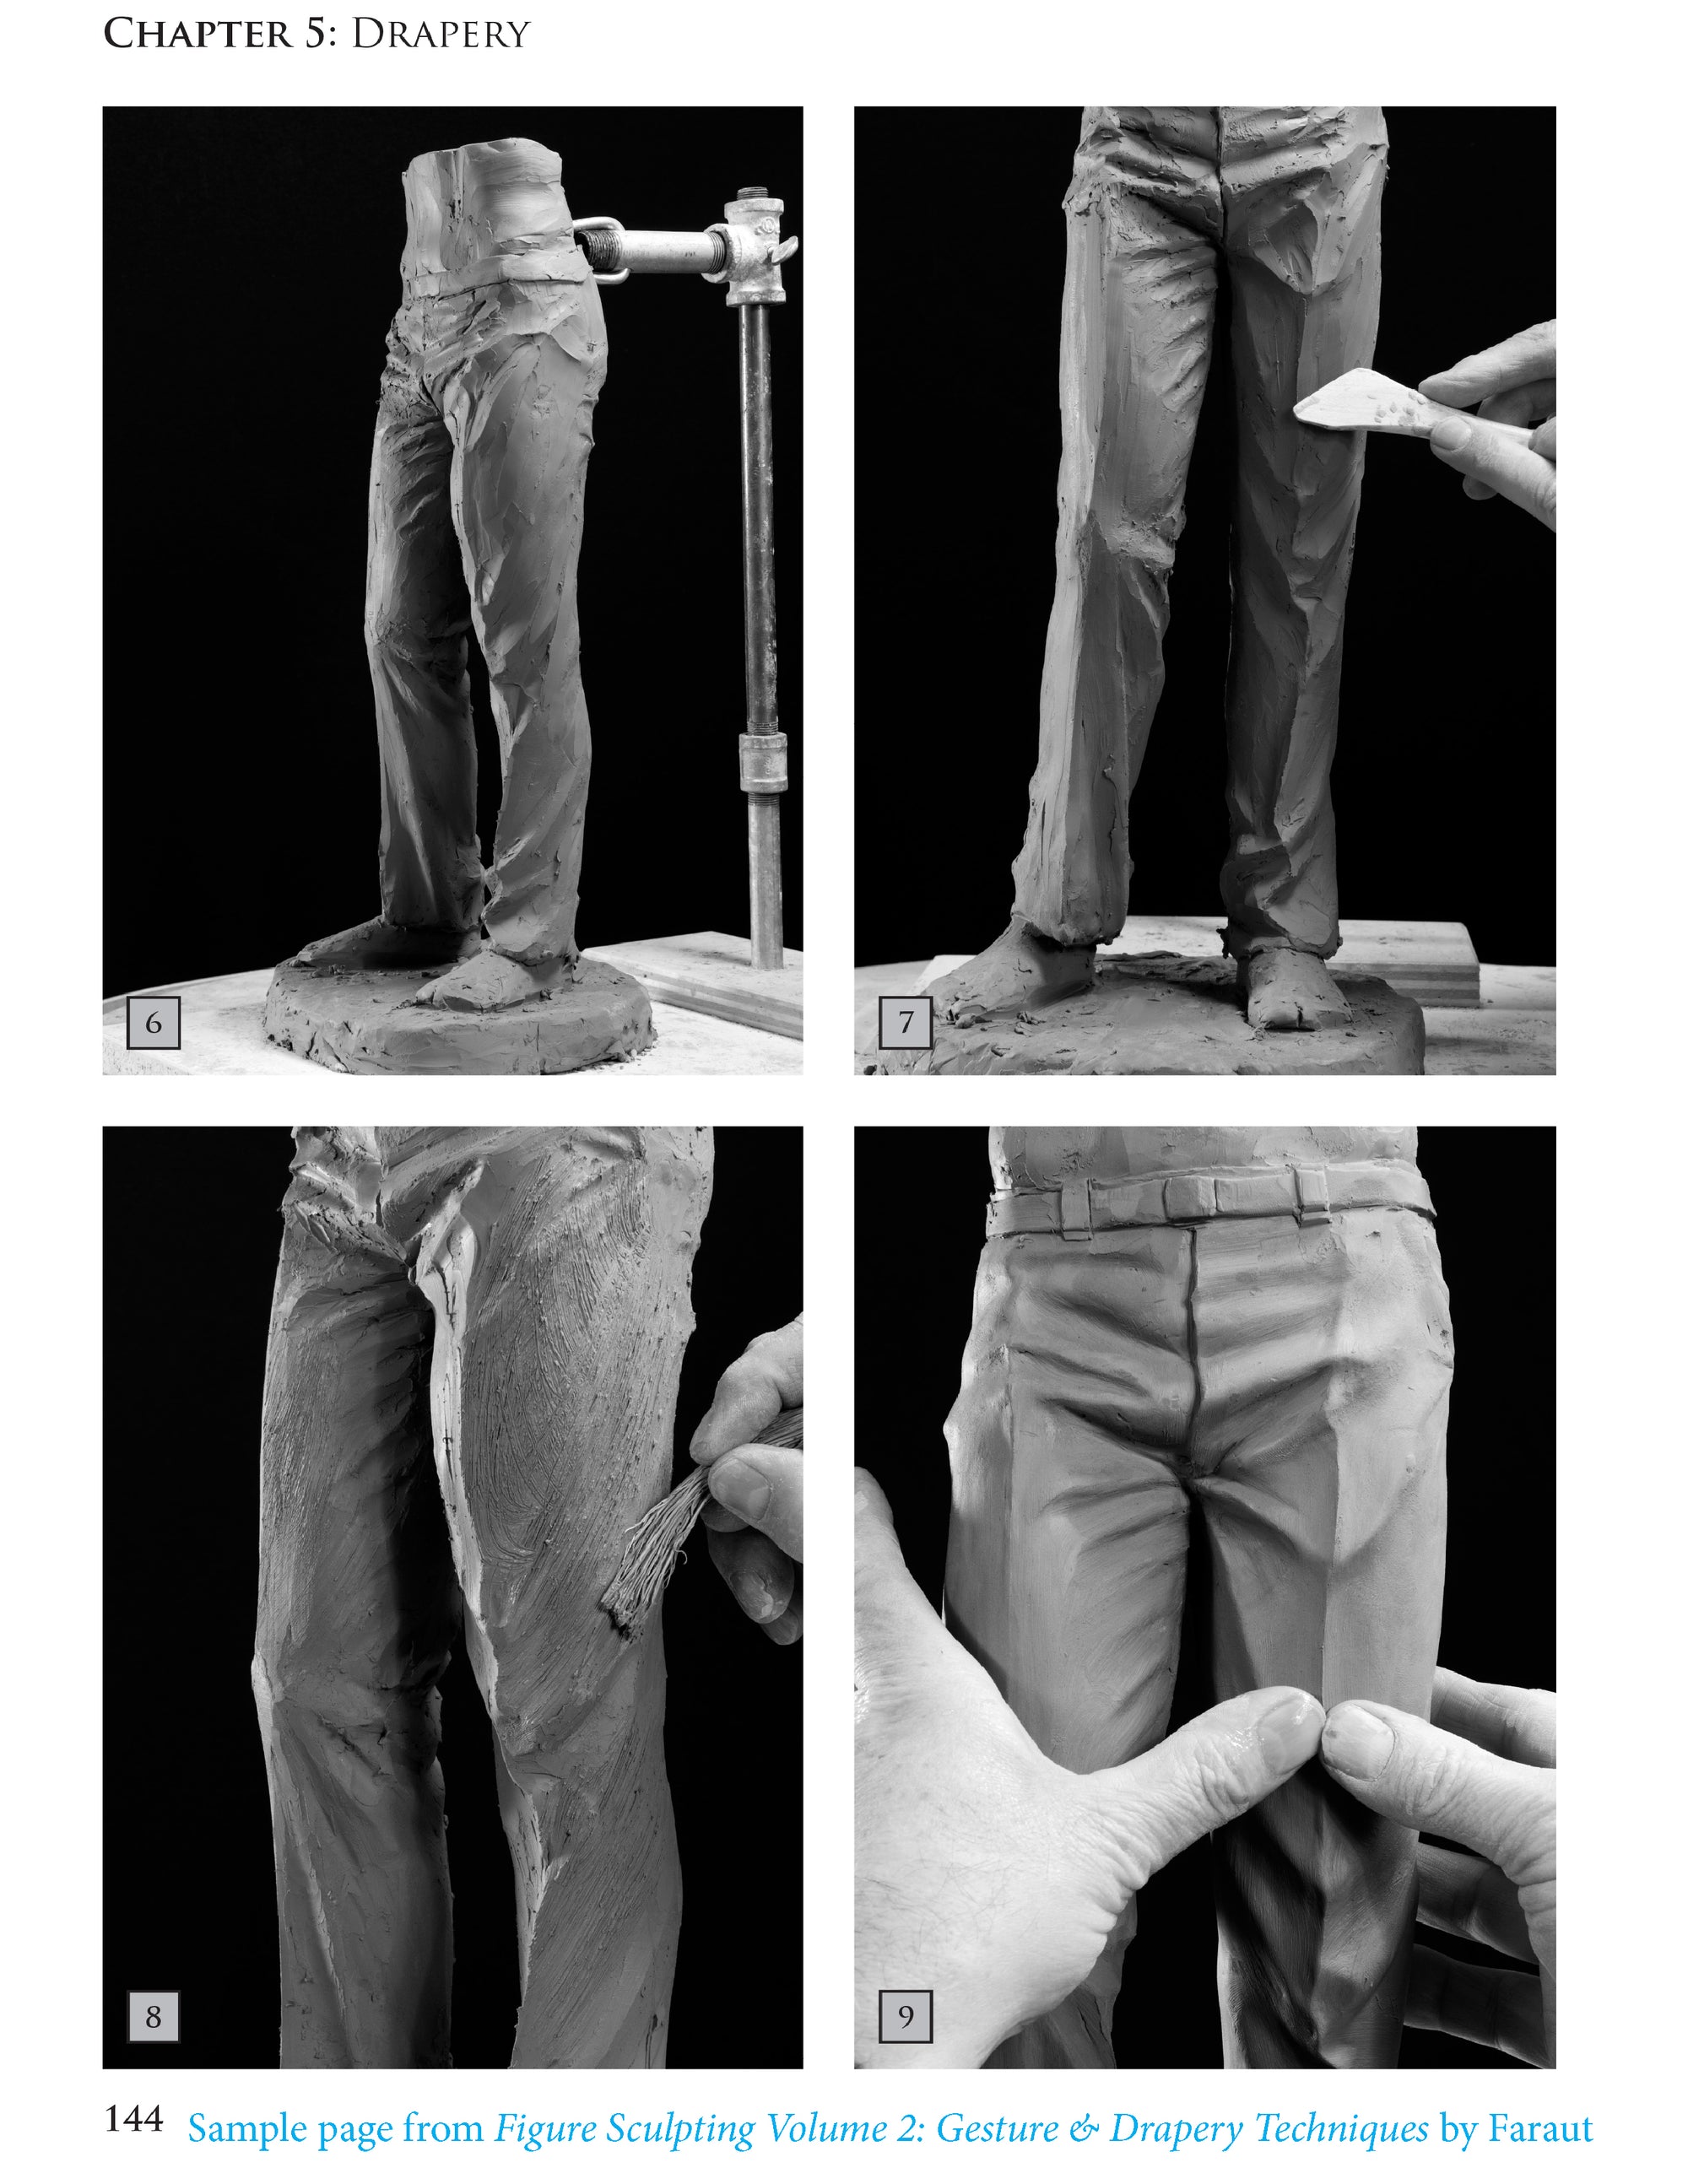  Sample page from book: Figure Sculpting Volume 2 by Faraut showing how to sculpt pants